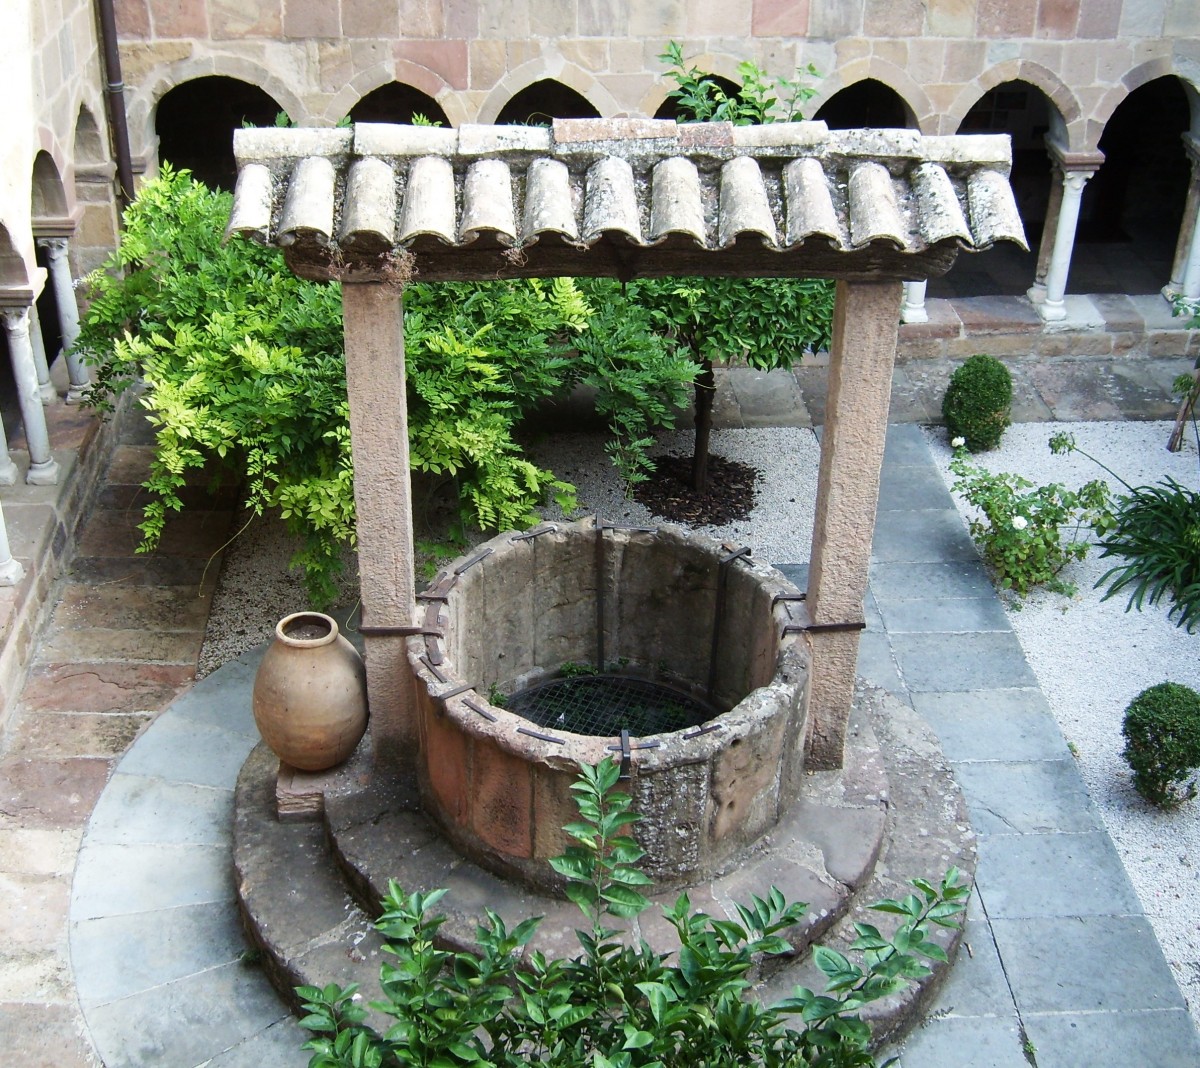 A massive wishing well positioned in the middle of a courtyard